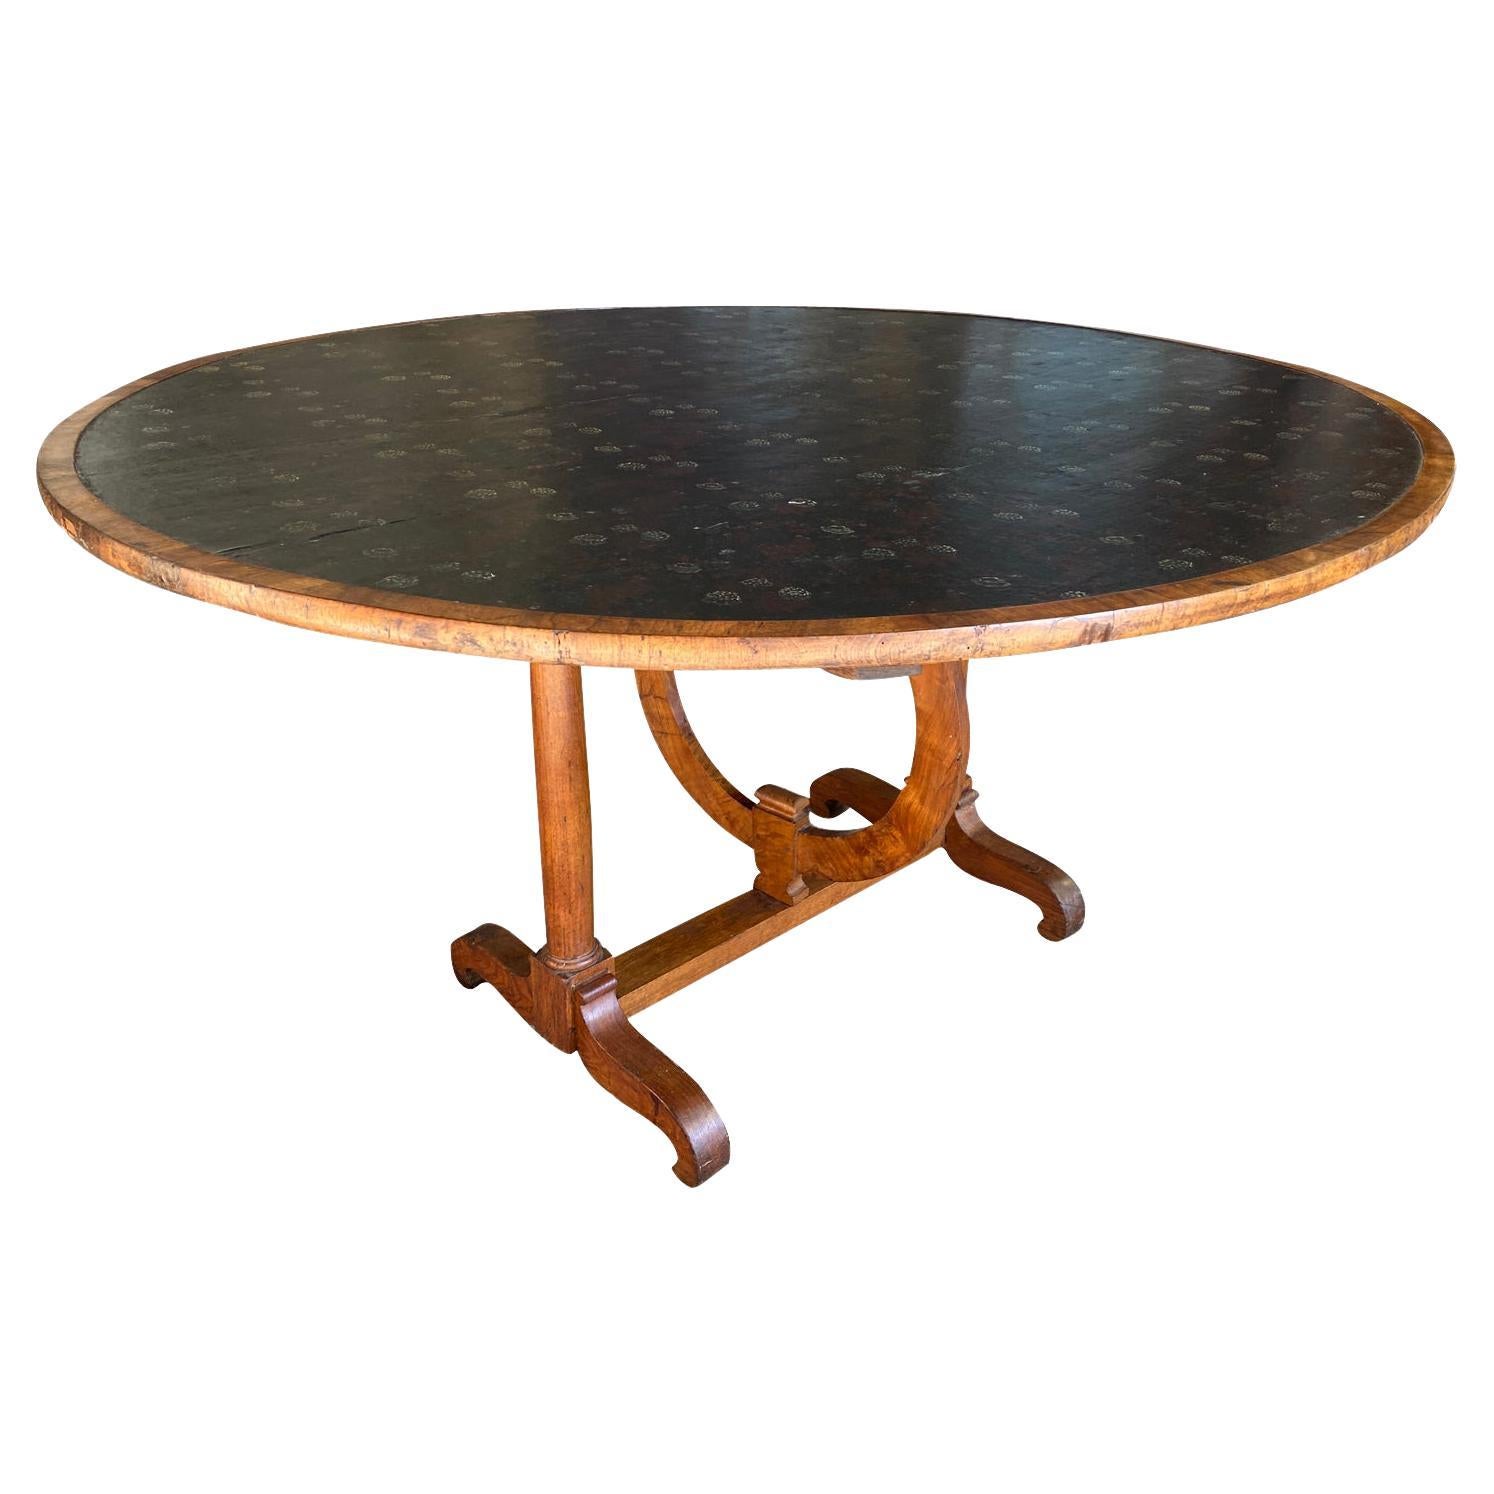 Early 19th French Century Oval Wine Tasting Table